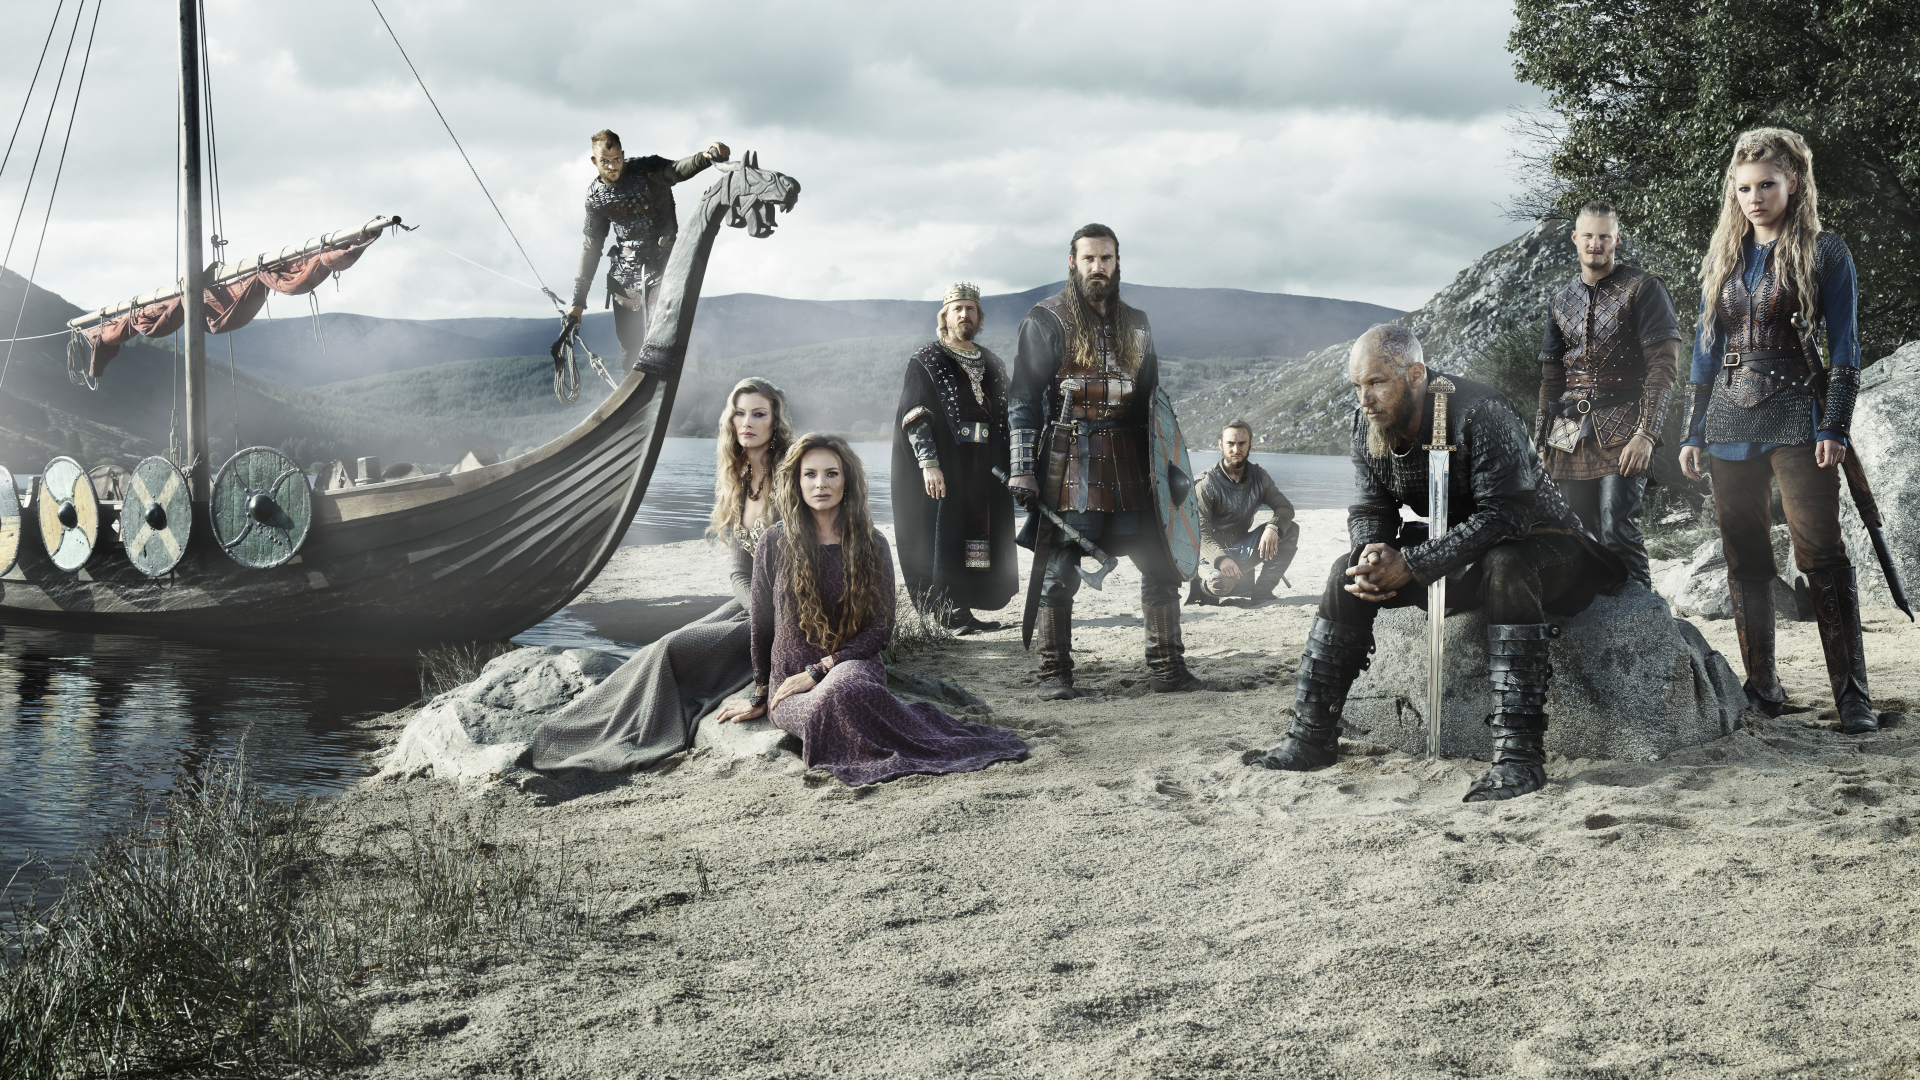 We get the first look at the second part of season 6 of Vikings.